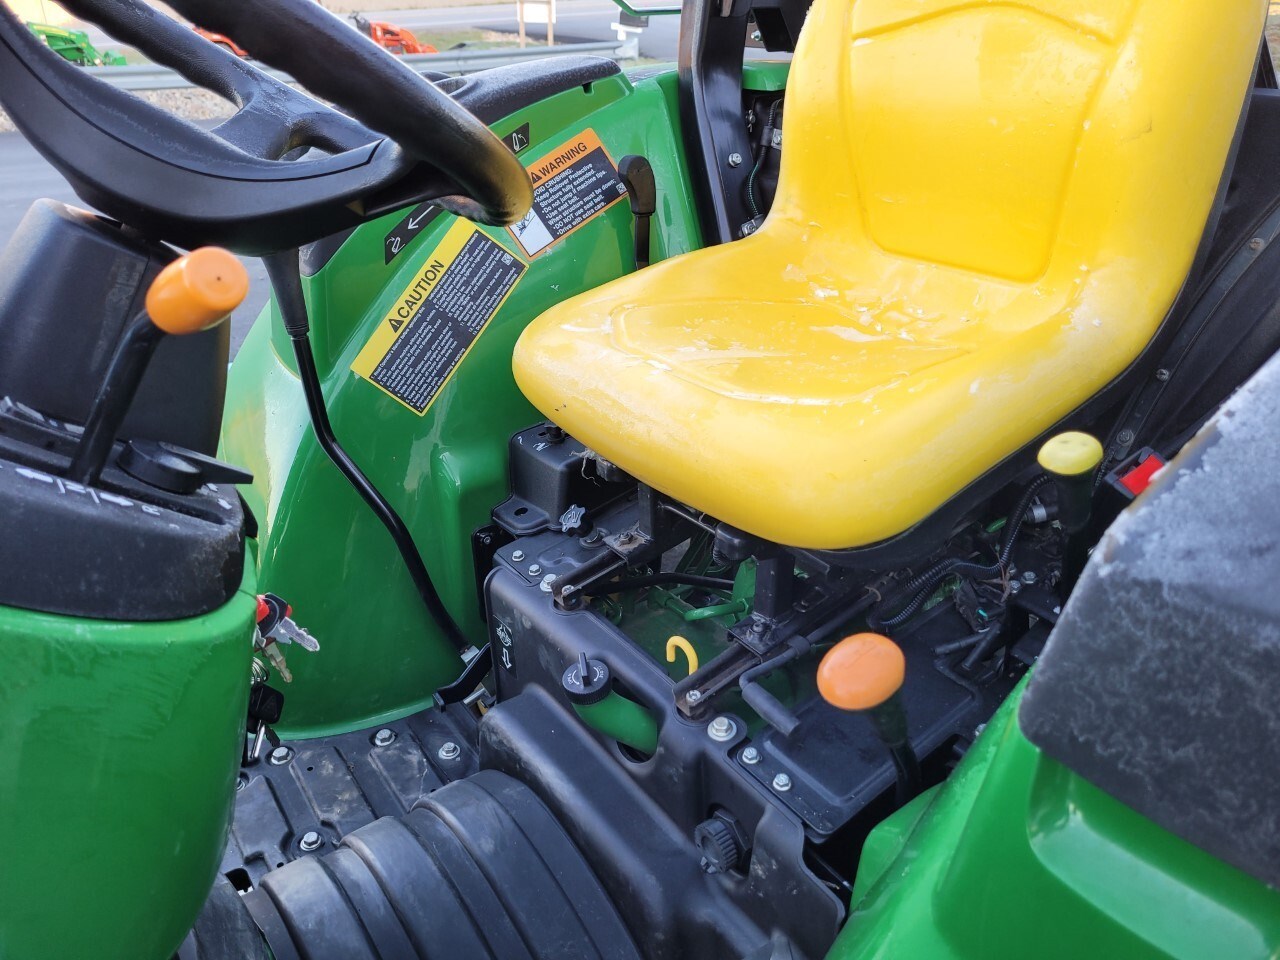 2020 John Deere 3043D Tractor - Compact Utility For Sale